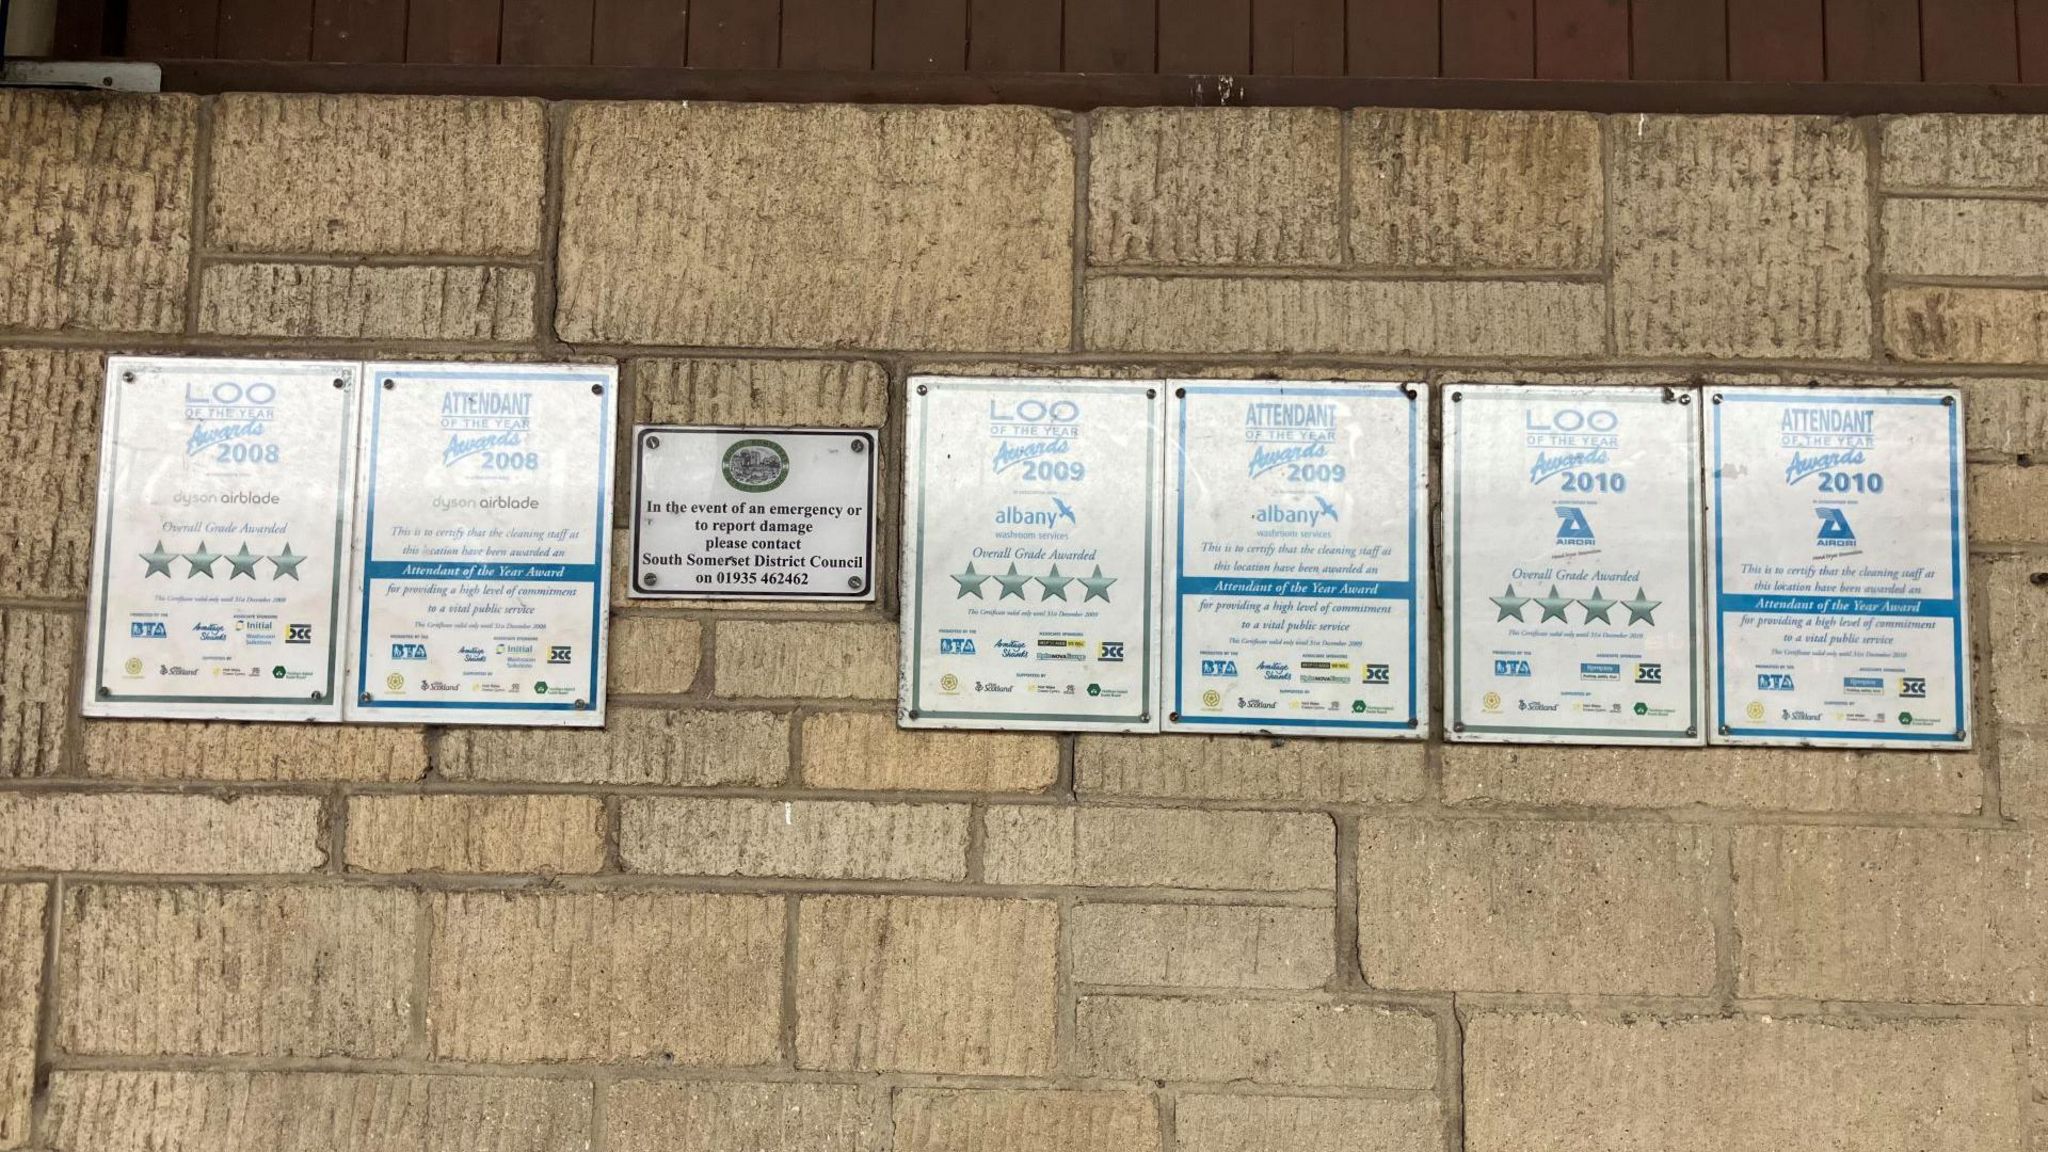 Awards on the wall of the toilets